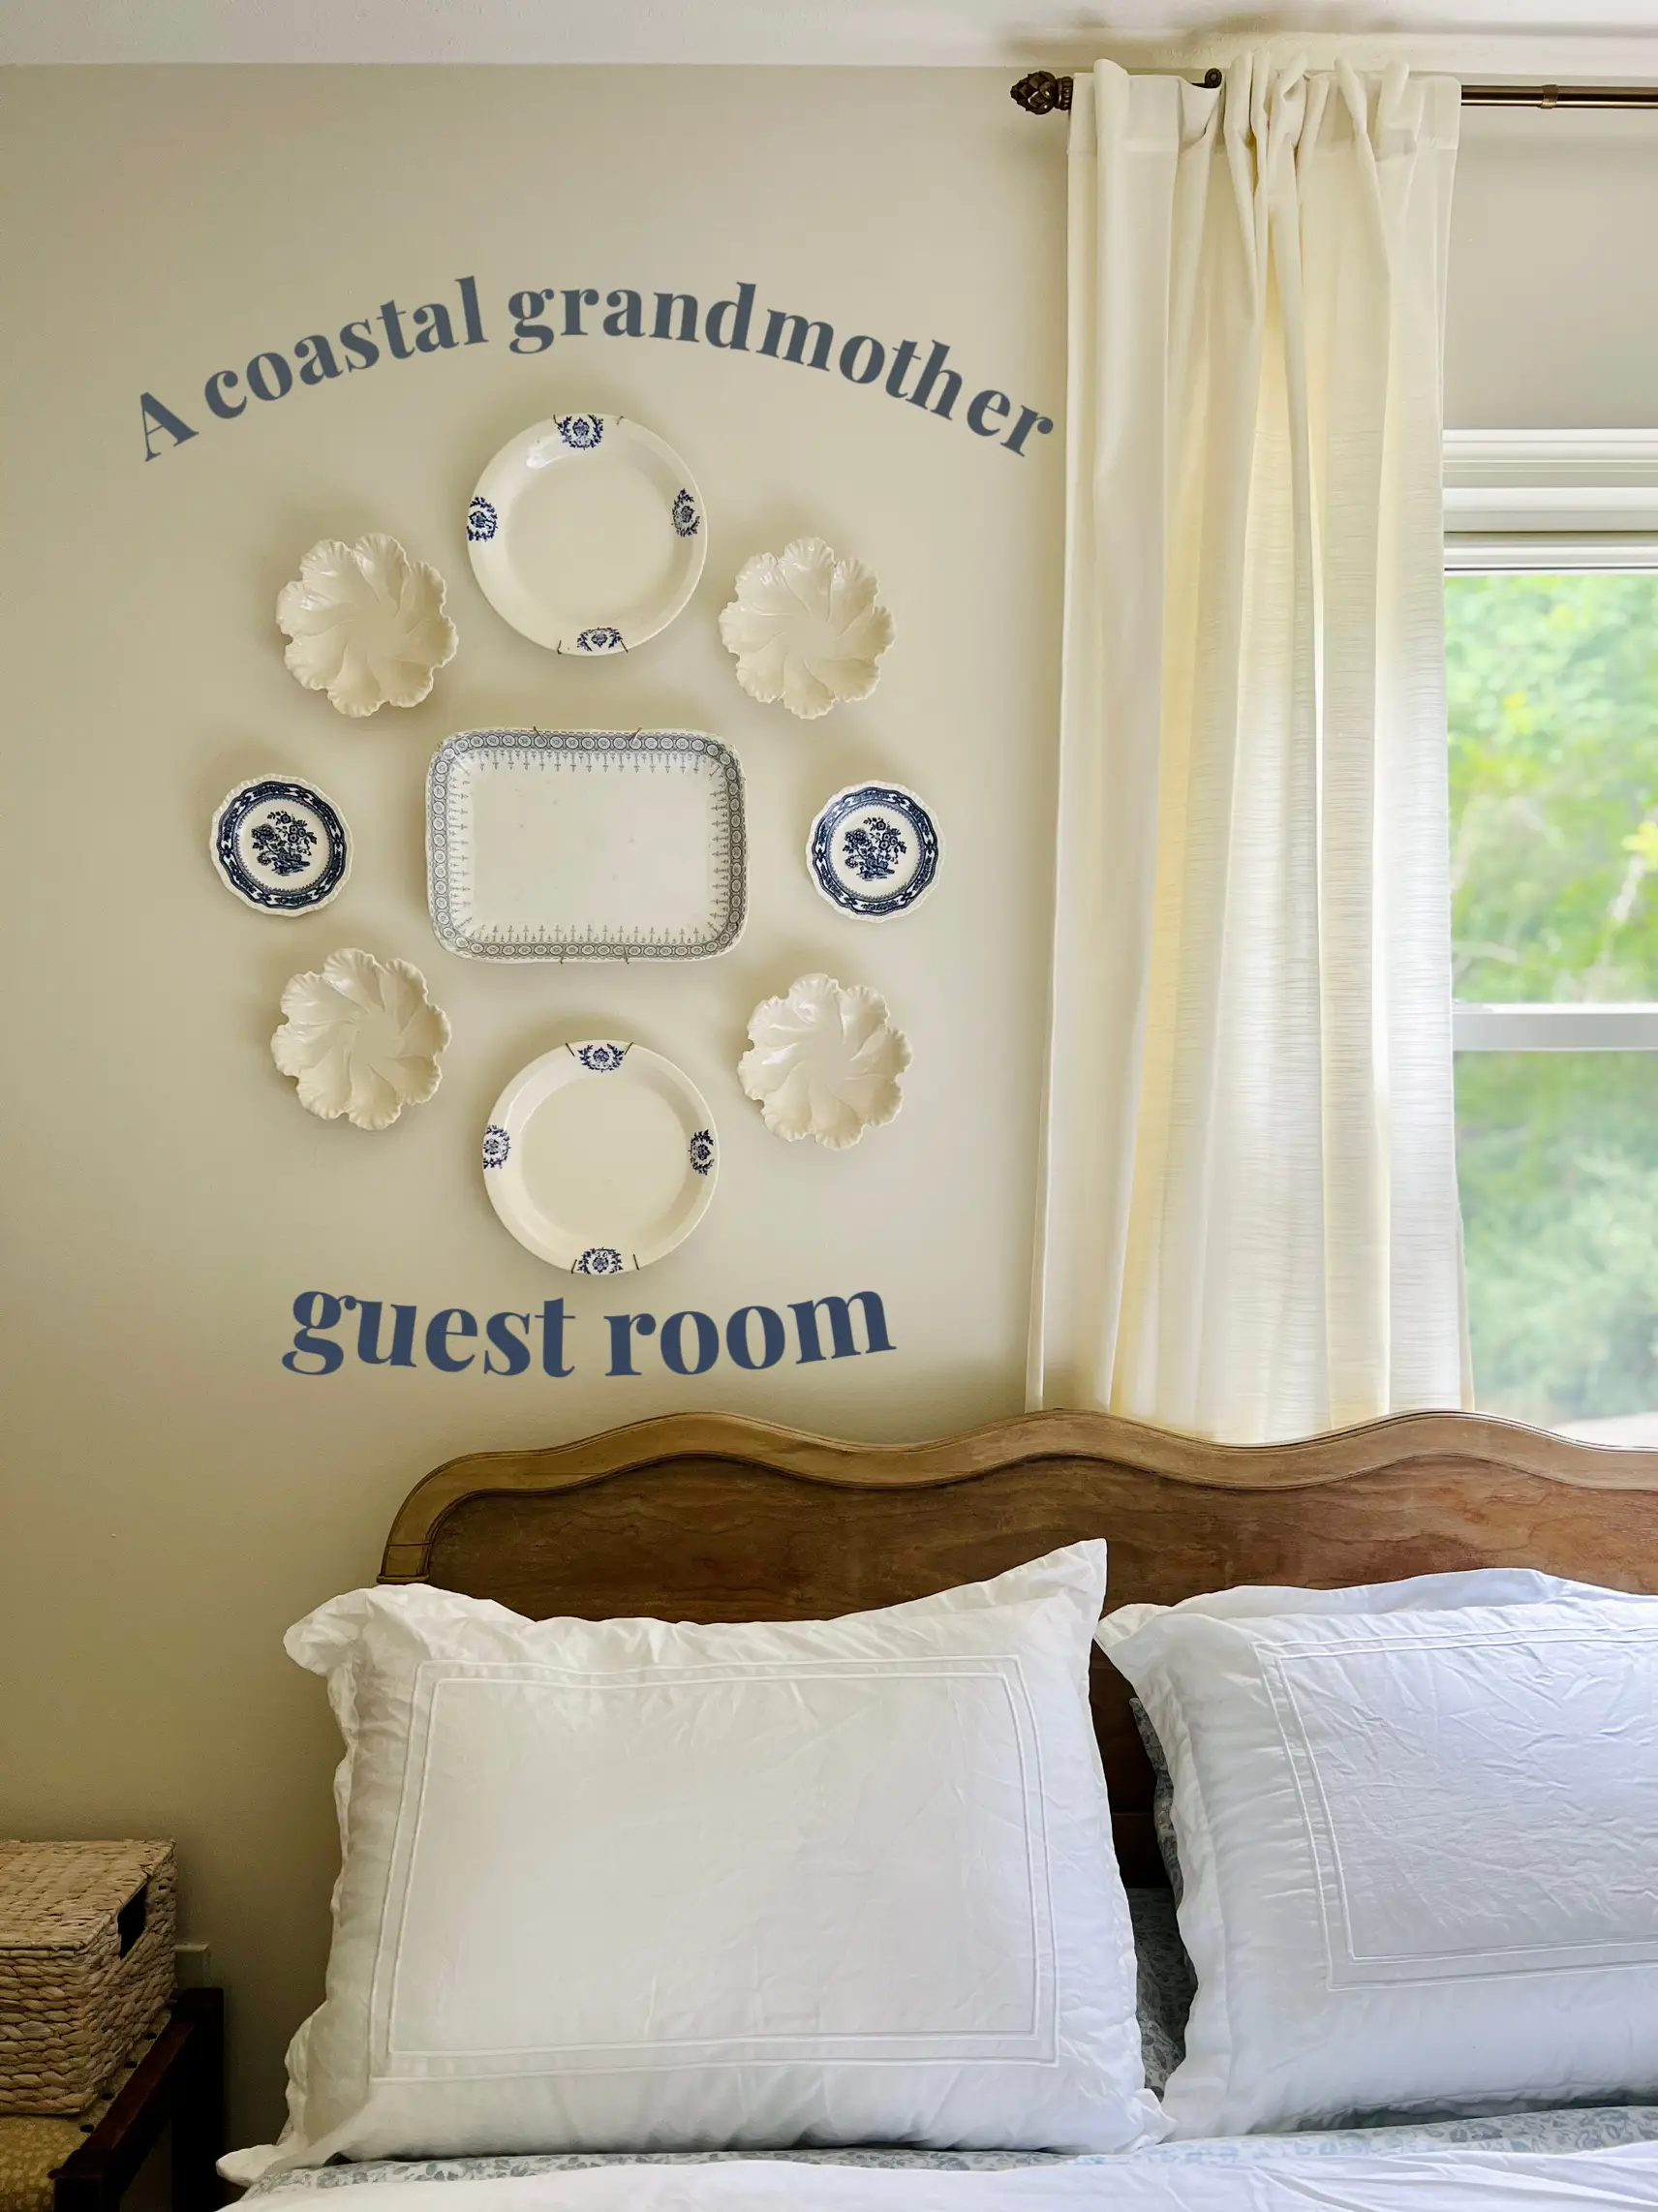 A chic, coastal grandmother guest room 🤍💙's images